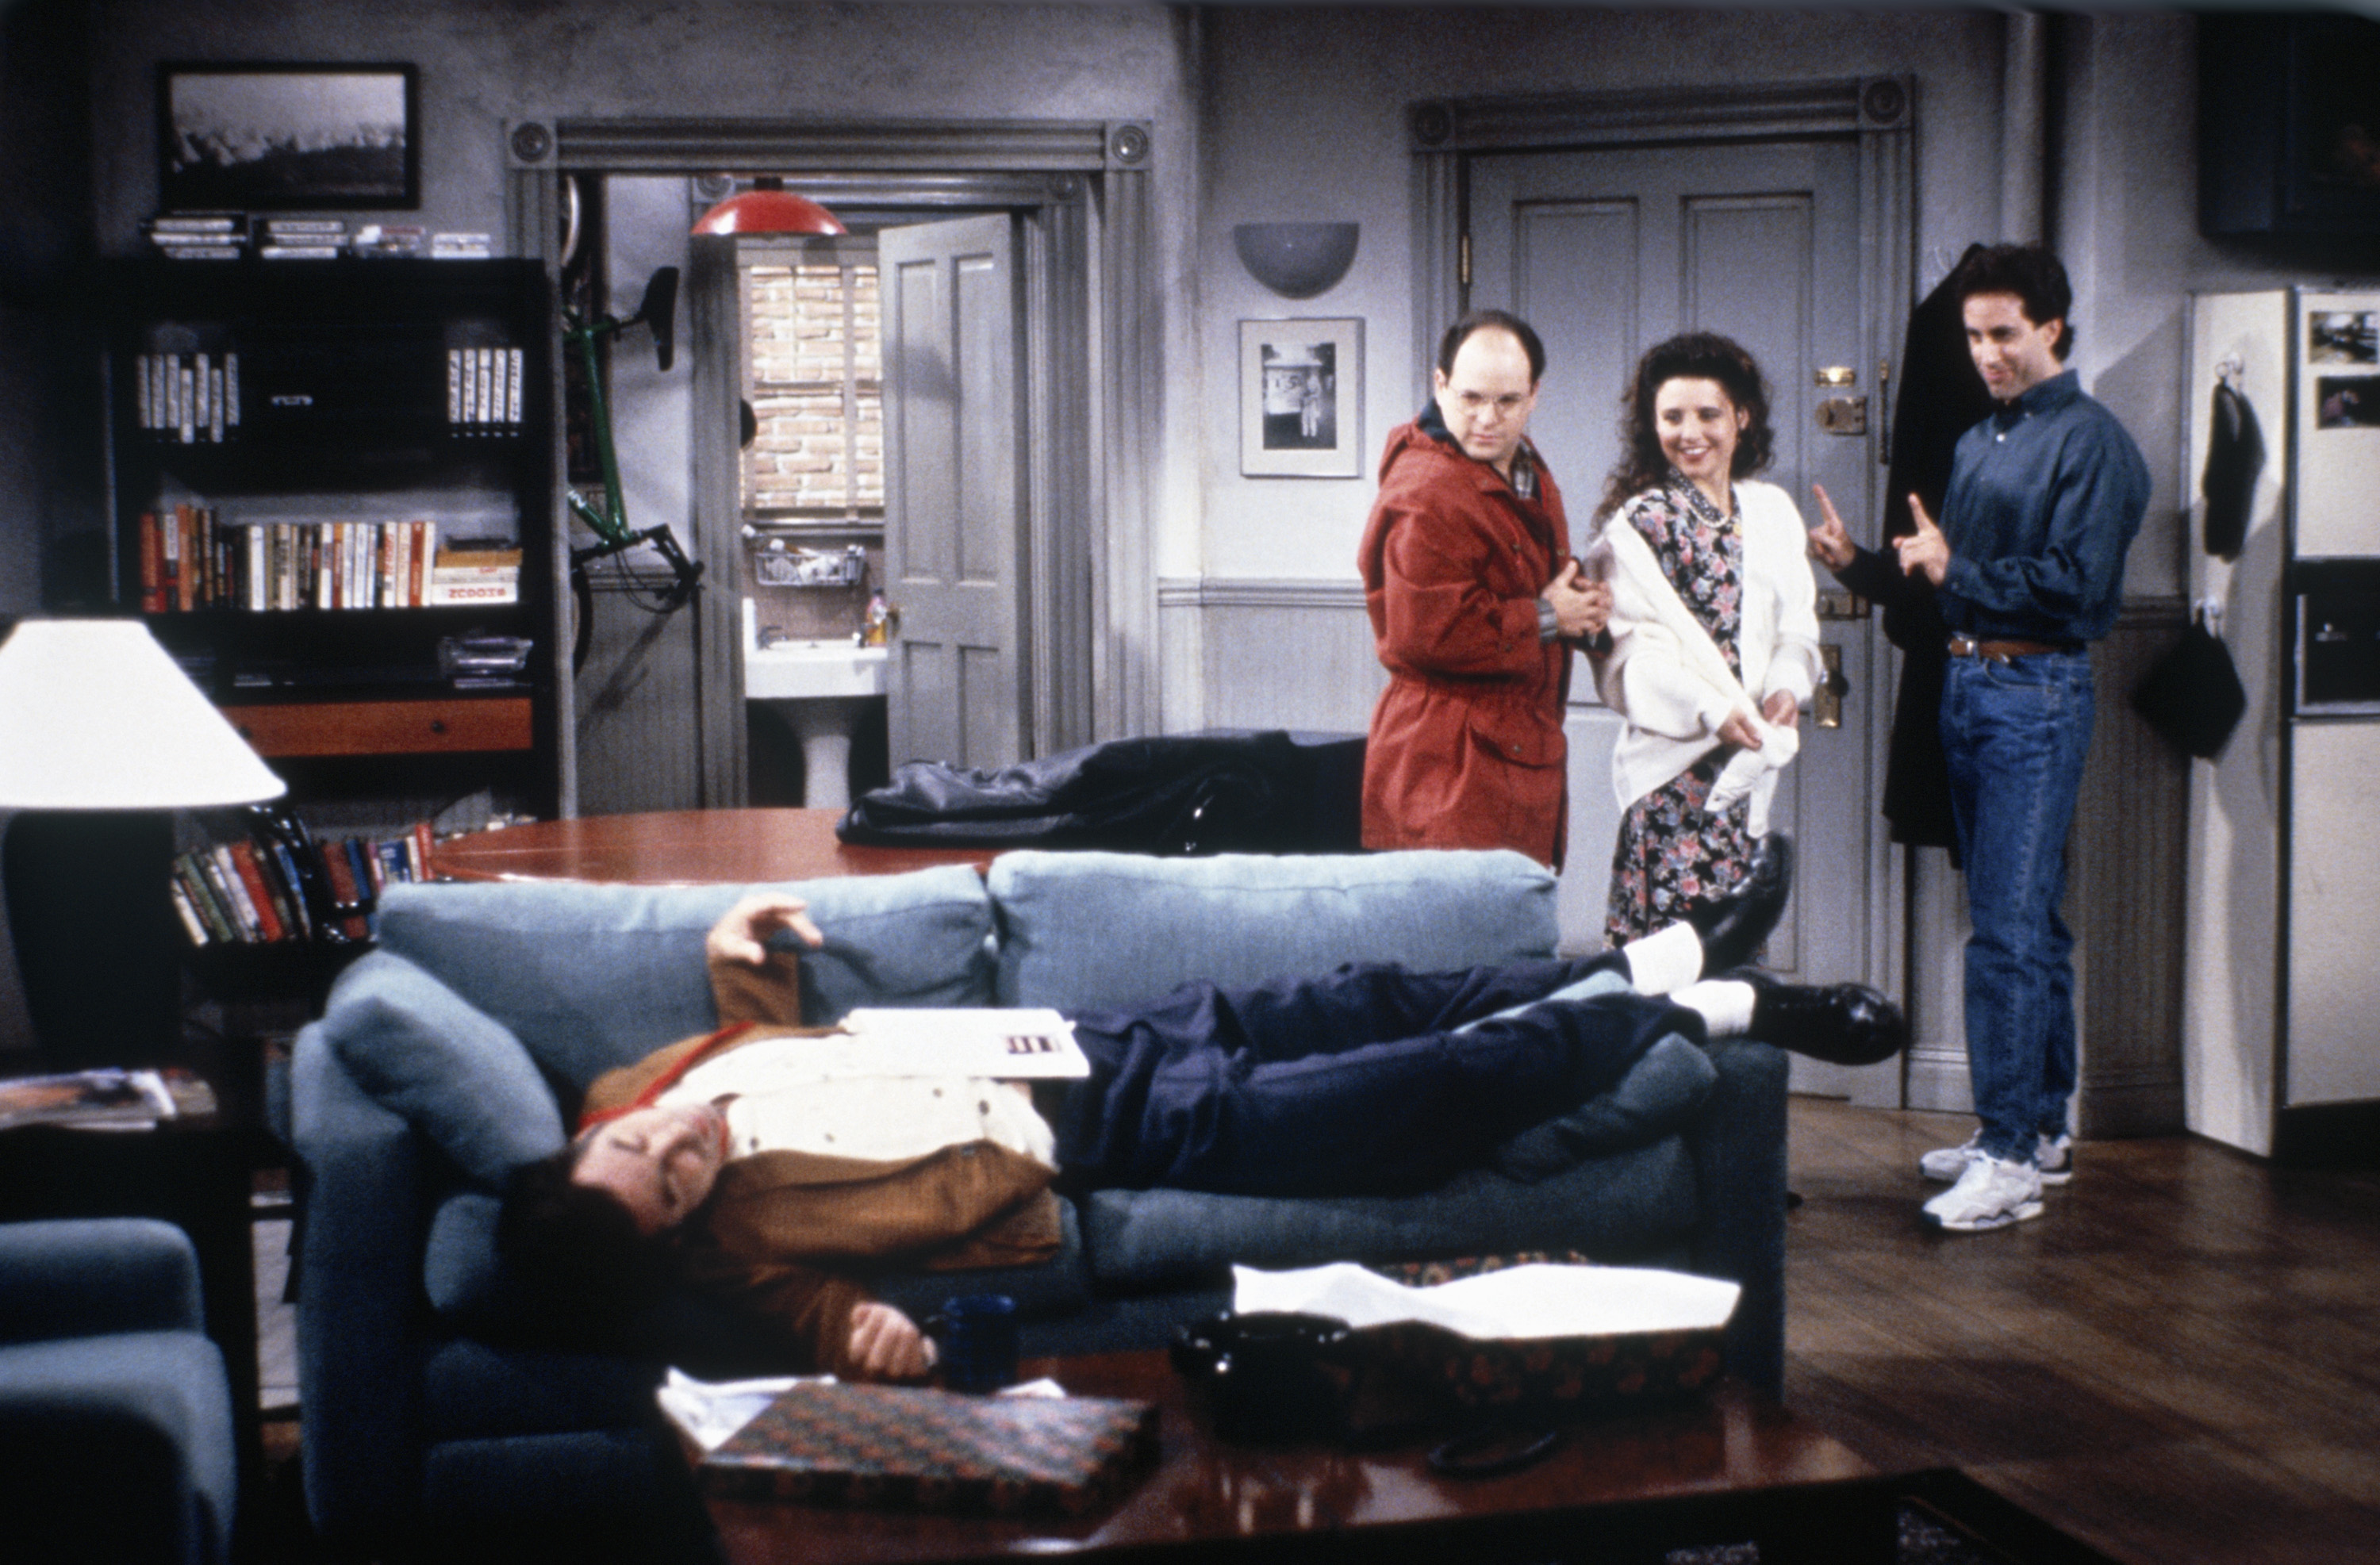 Cosmo Kramer, George Costanza, J Elaine Benes and Jerry Seinfeld in Jerry's Apartment